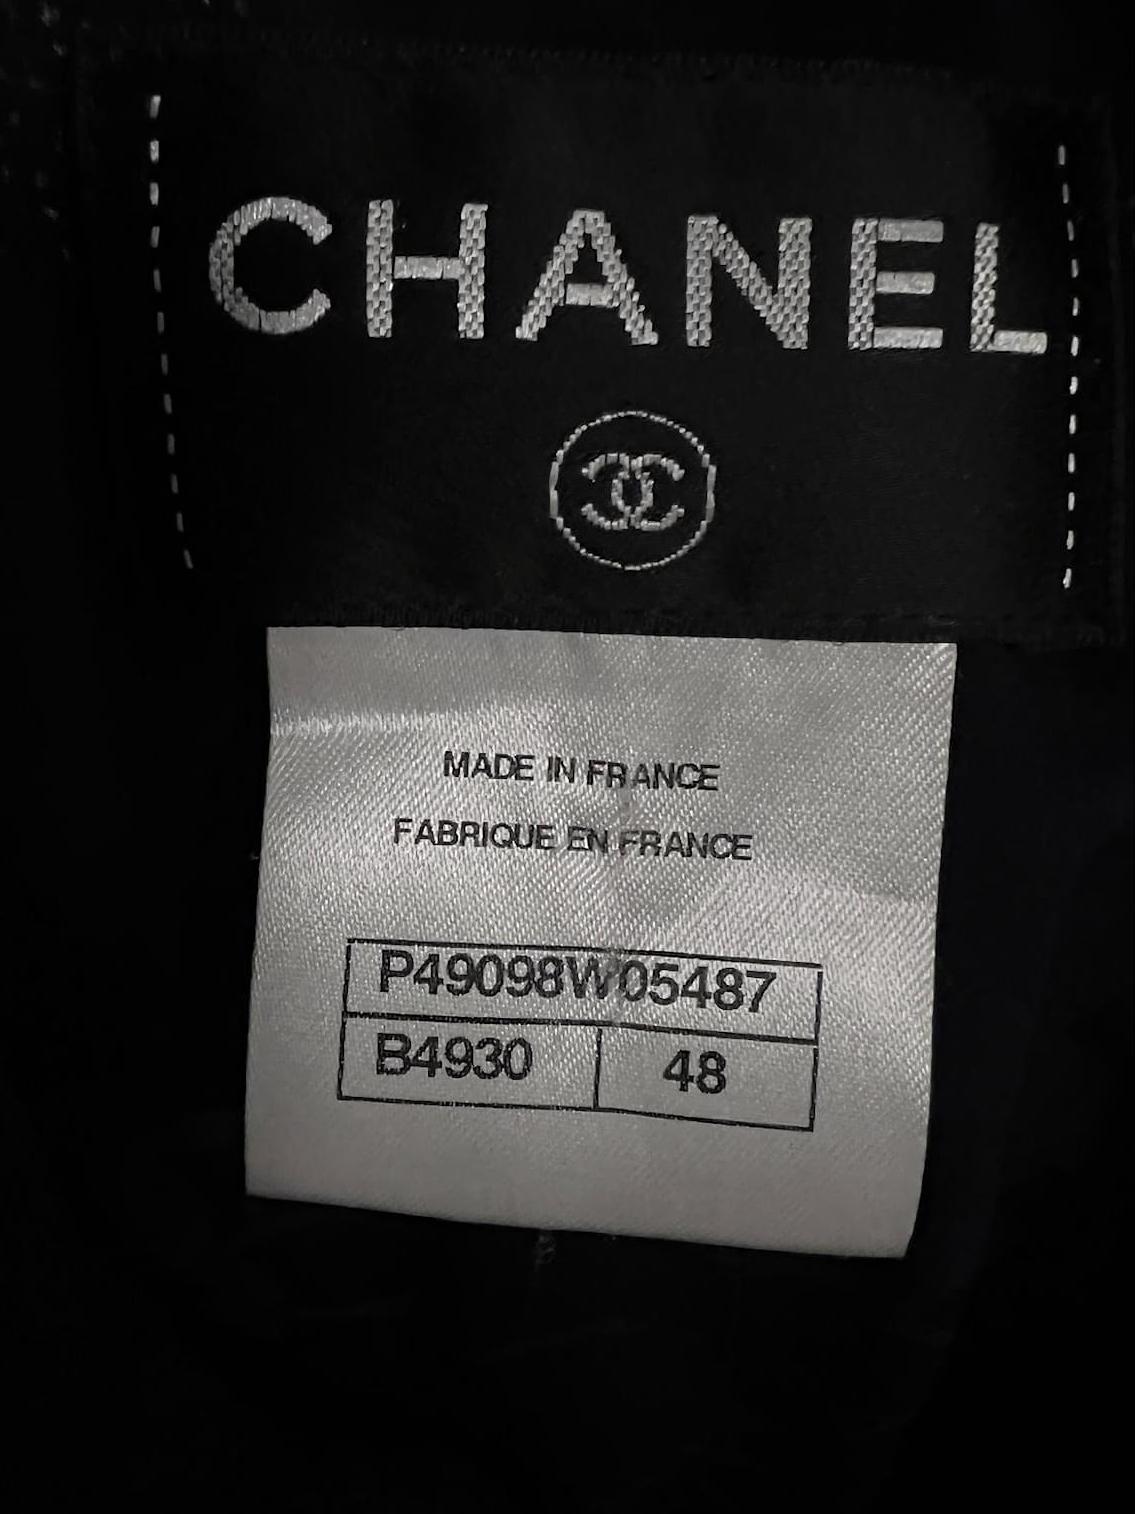 Chanel Graffiti Collection Lesage Tweed Dress For Sale 11